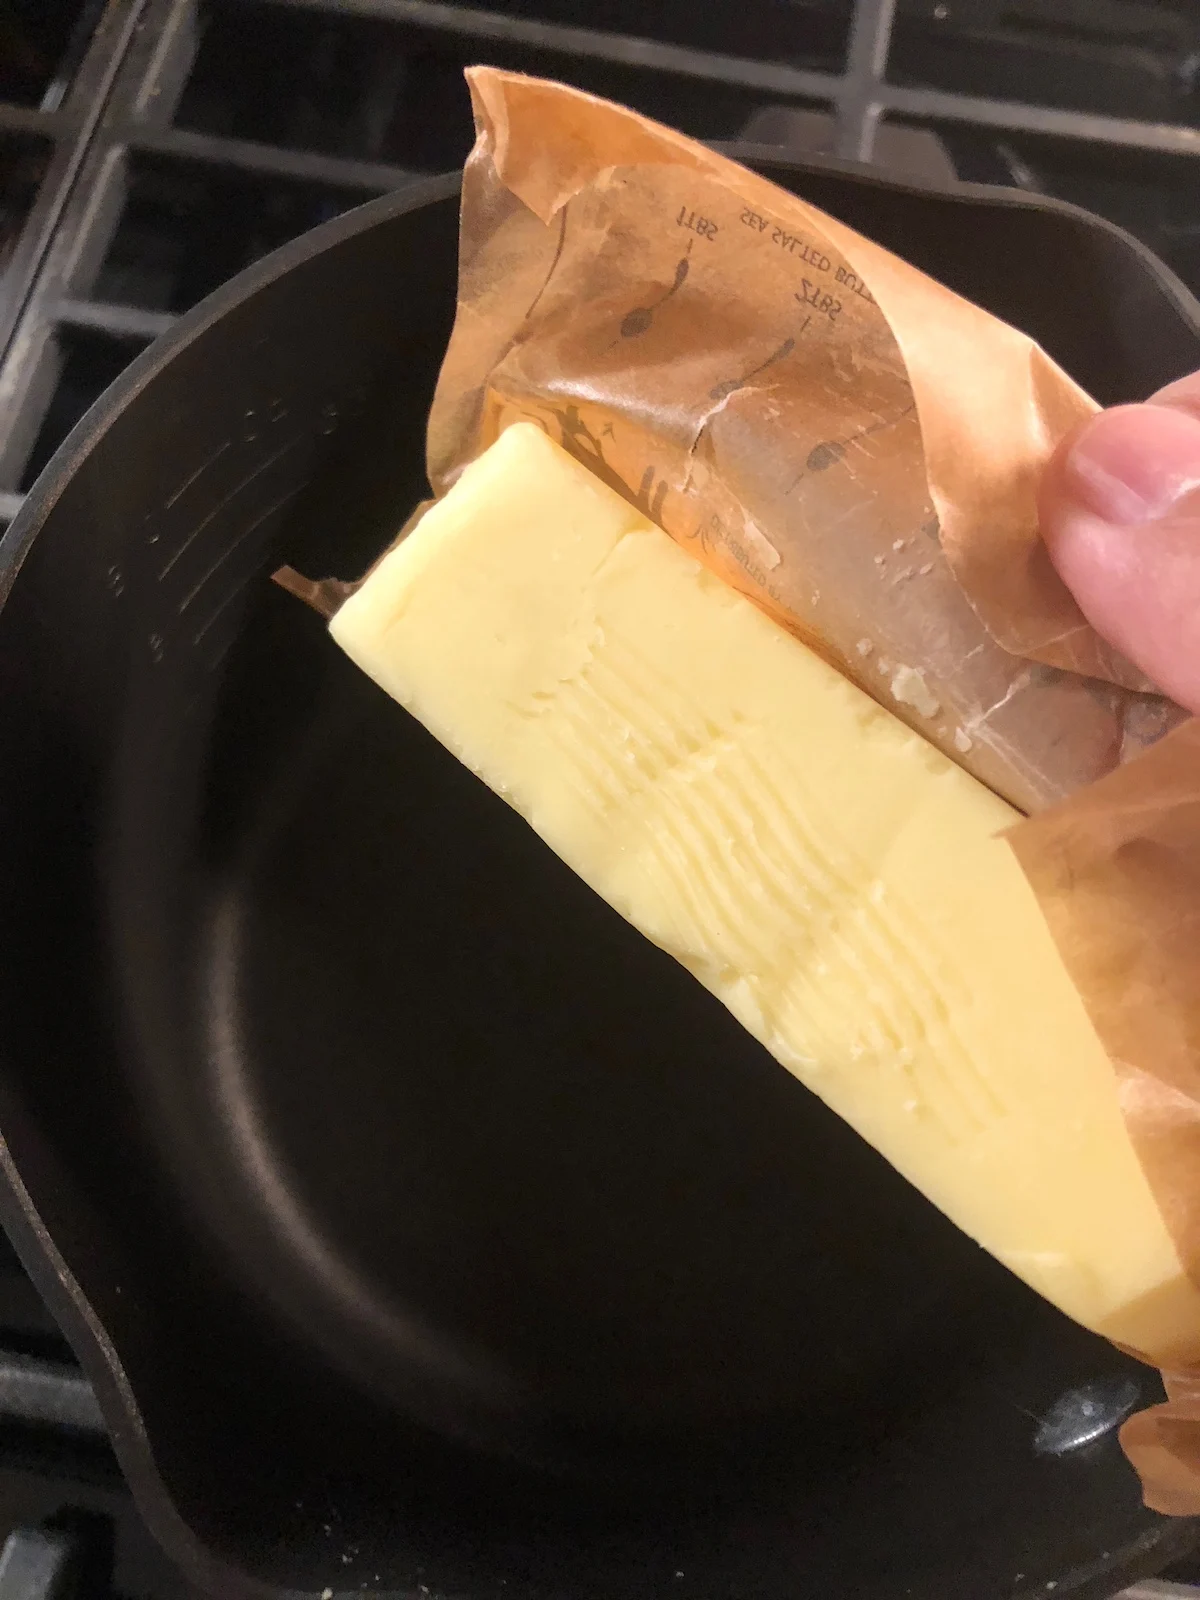 Unwrap butter and put into the saucepan